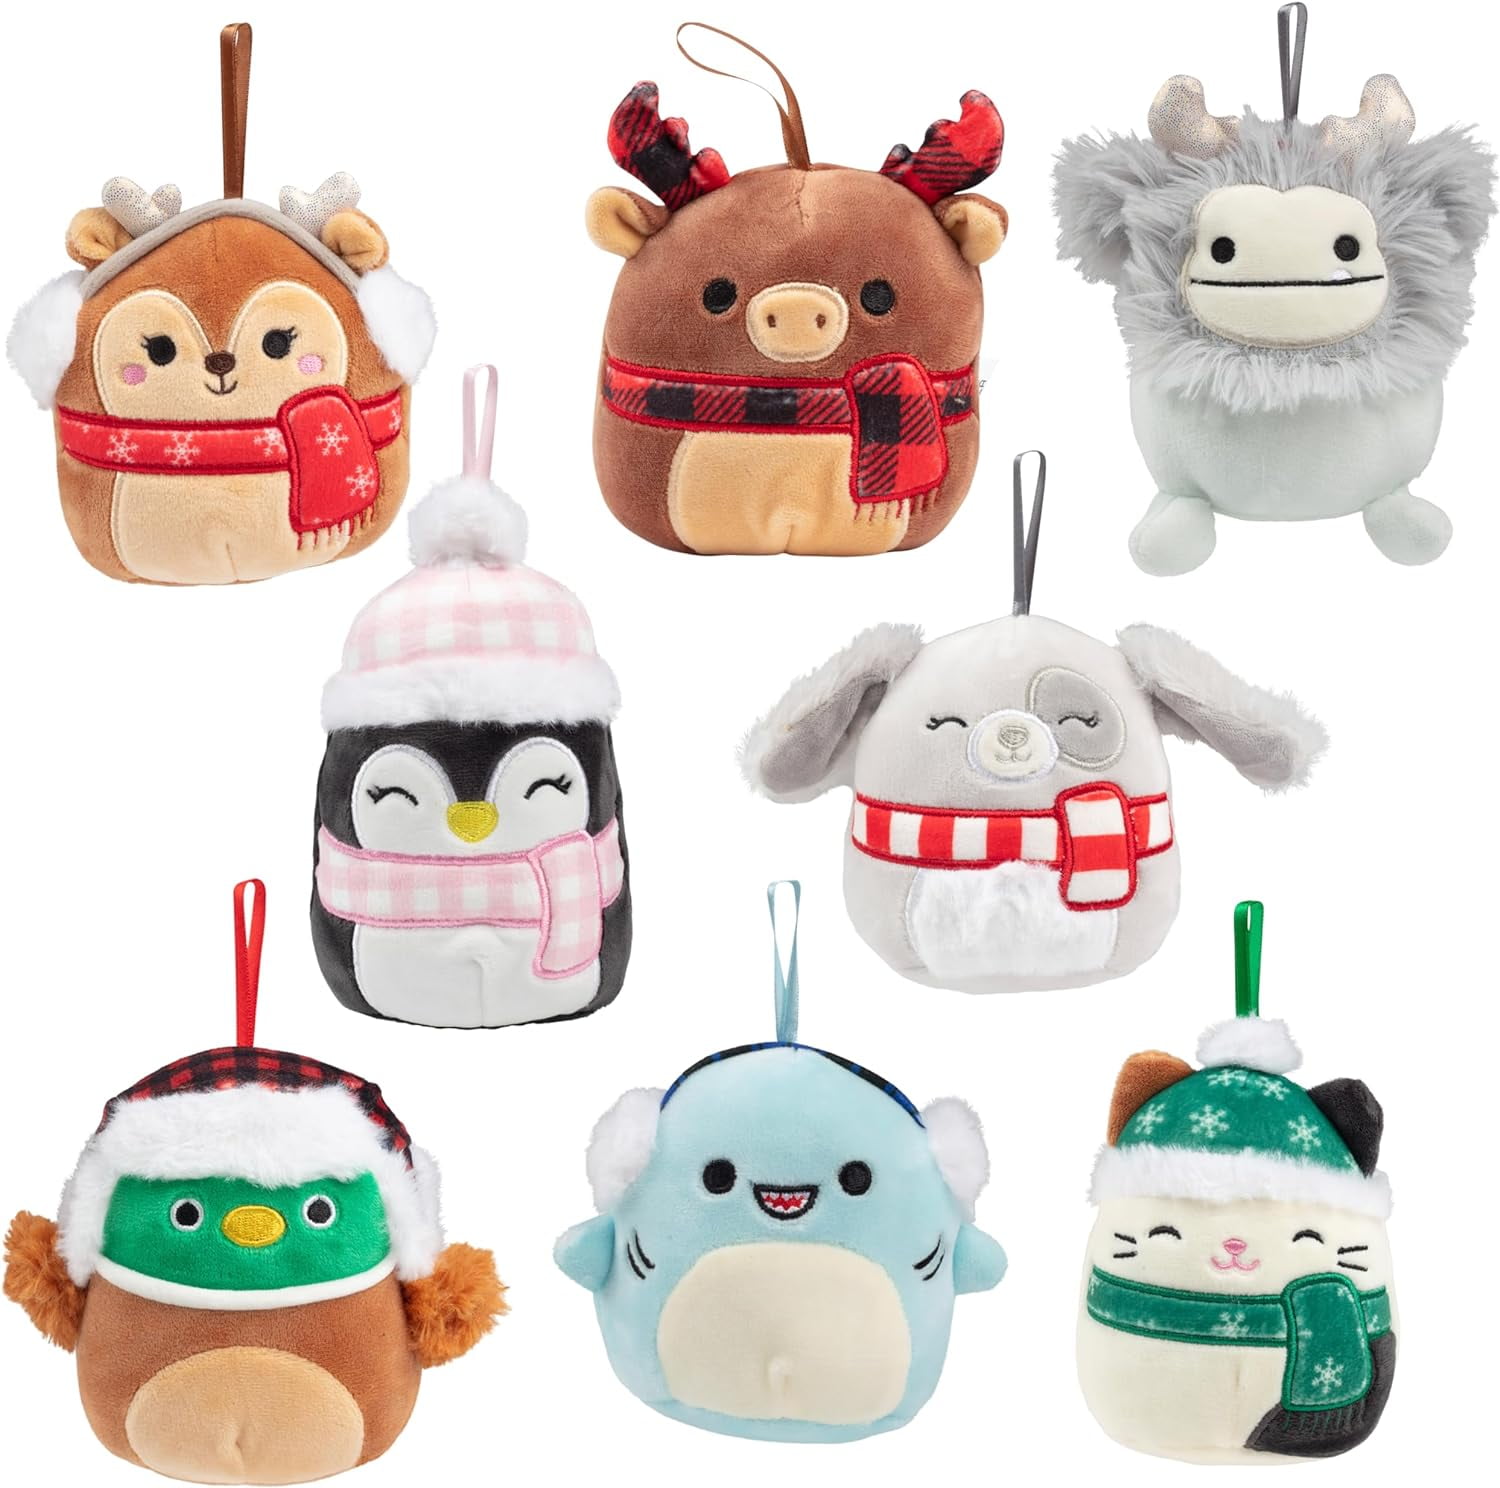 Squishmallows Jewelry Design Set #squishmallows #squishy #fyp #toys  #toysforkids 